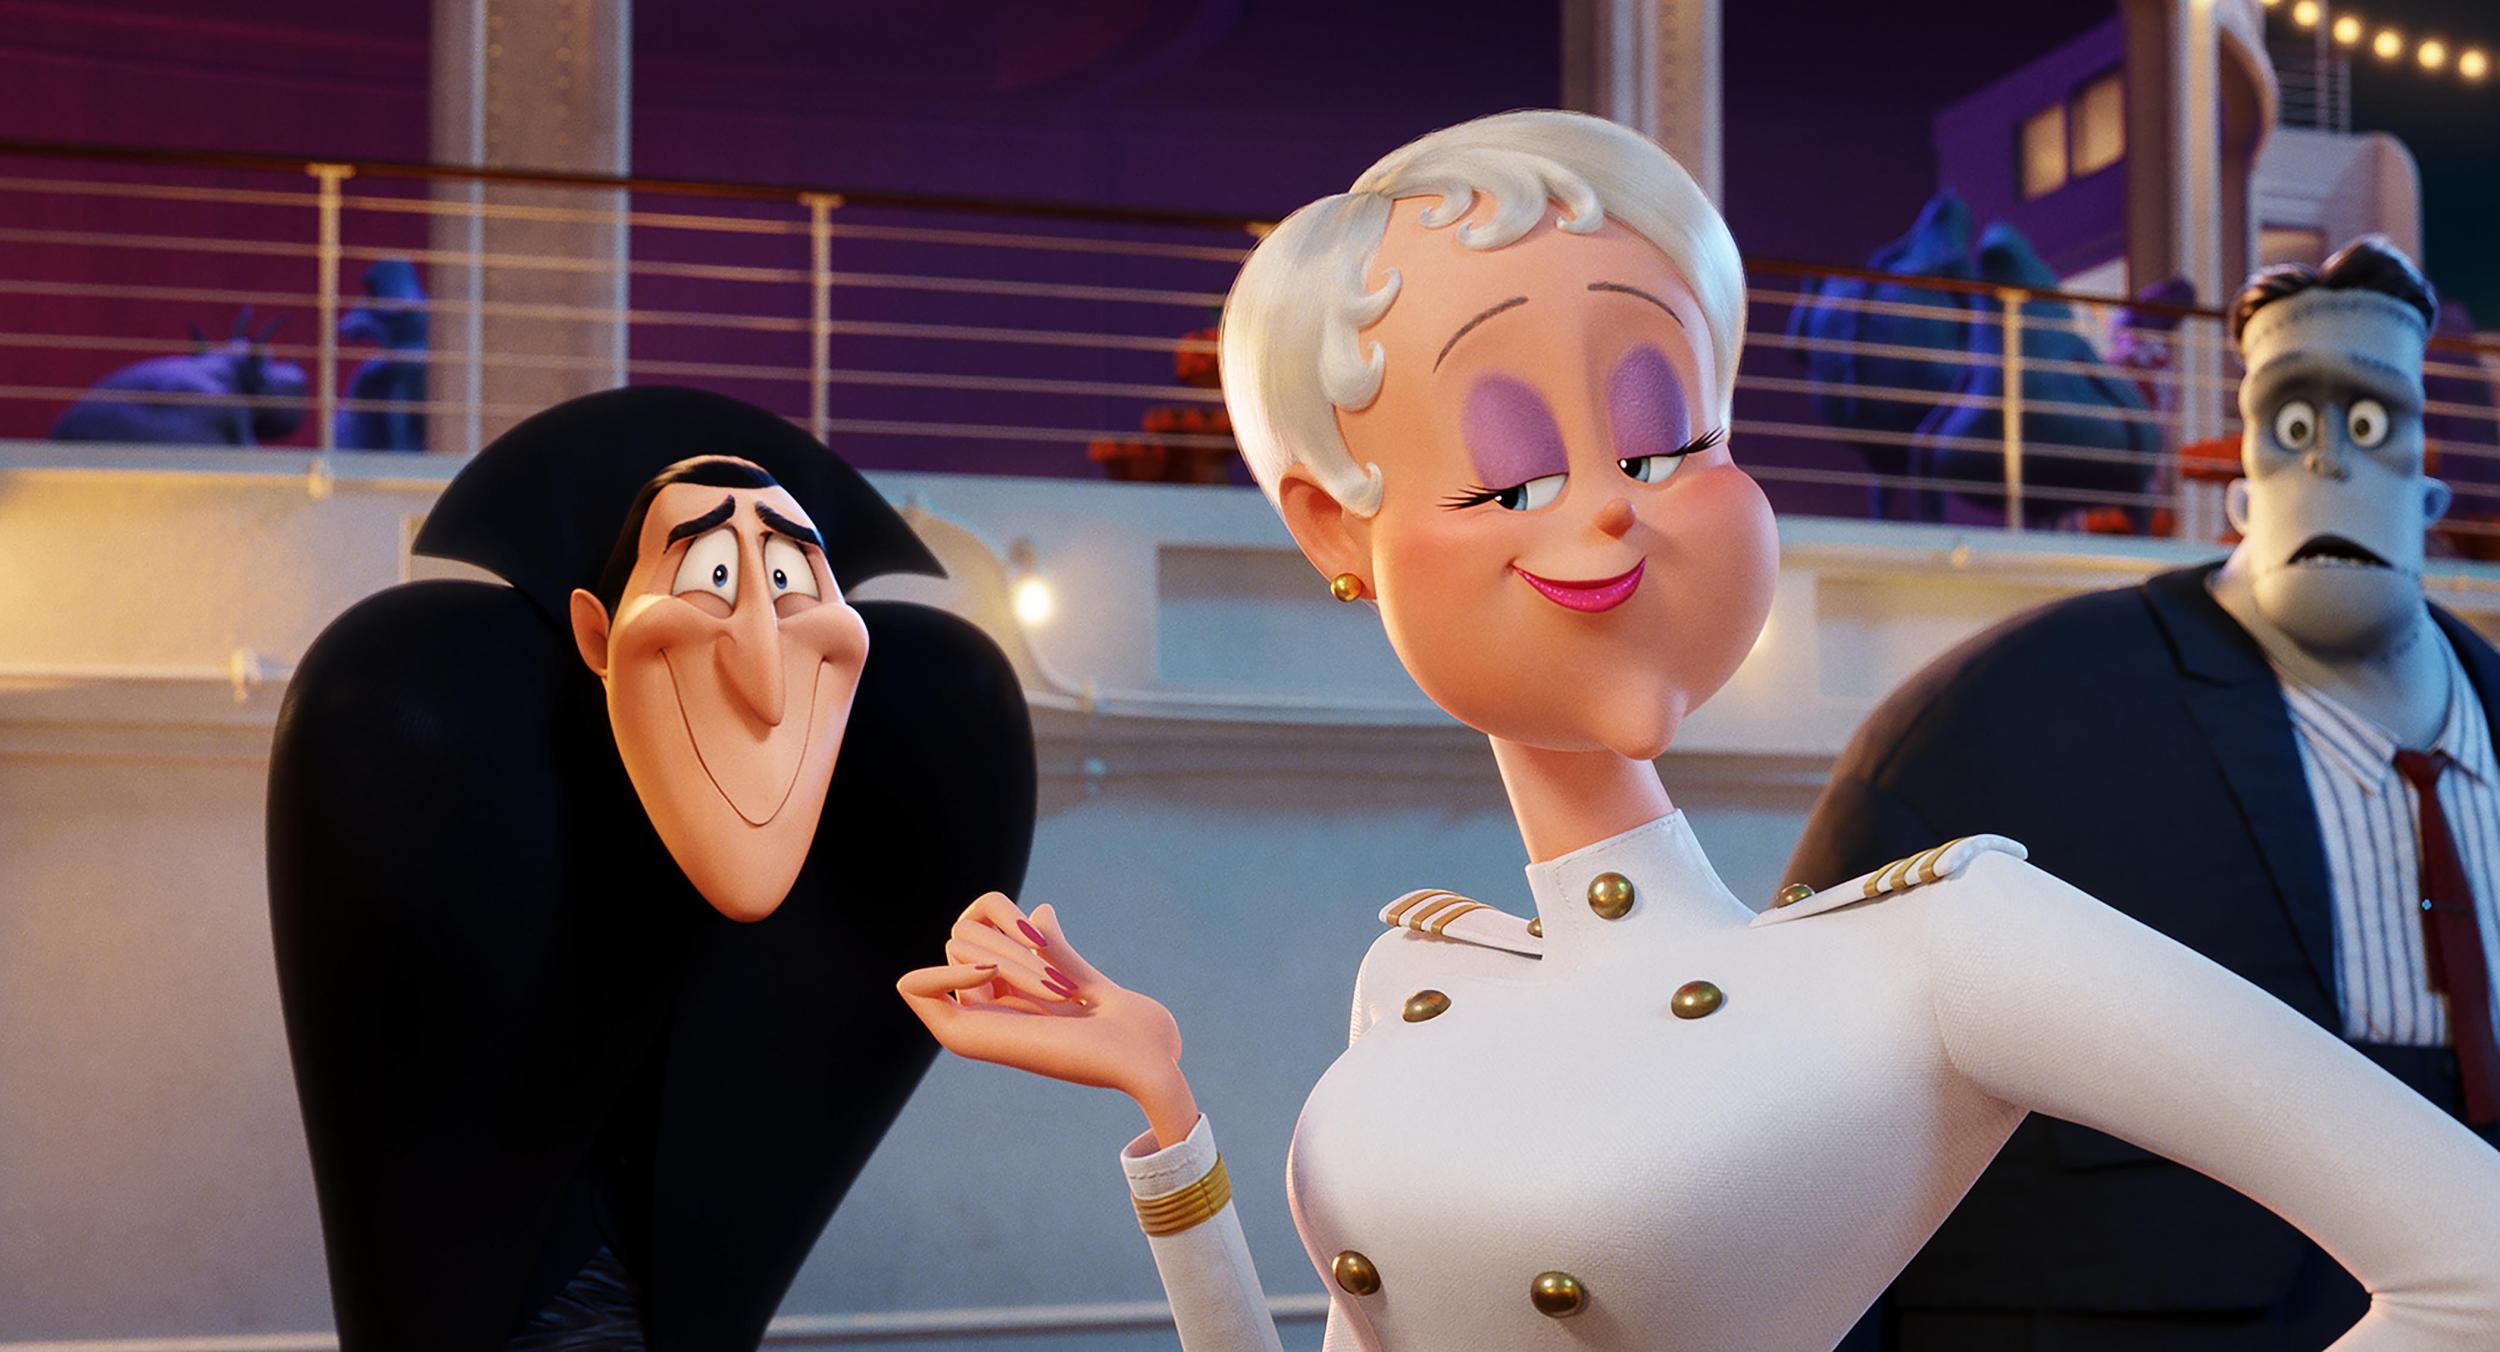 Hotel Transylvania 3 sees the monster family embark on a luxury monster cruise ship